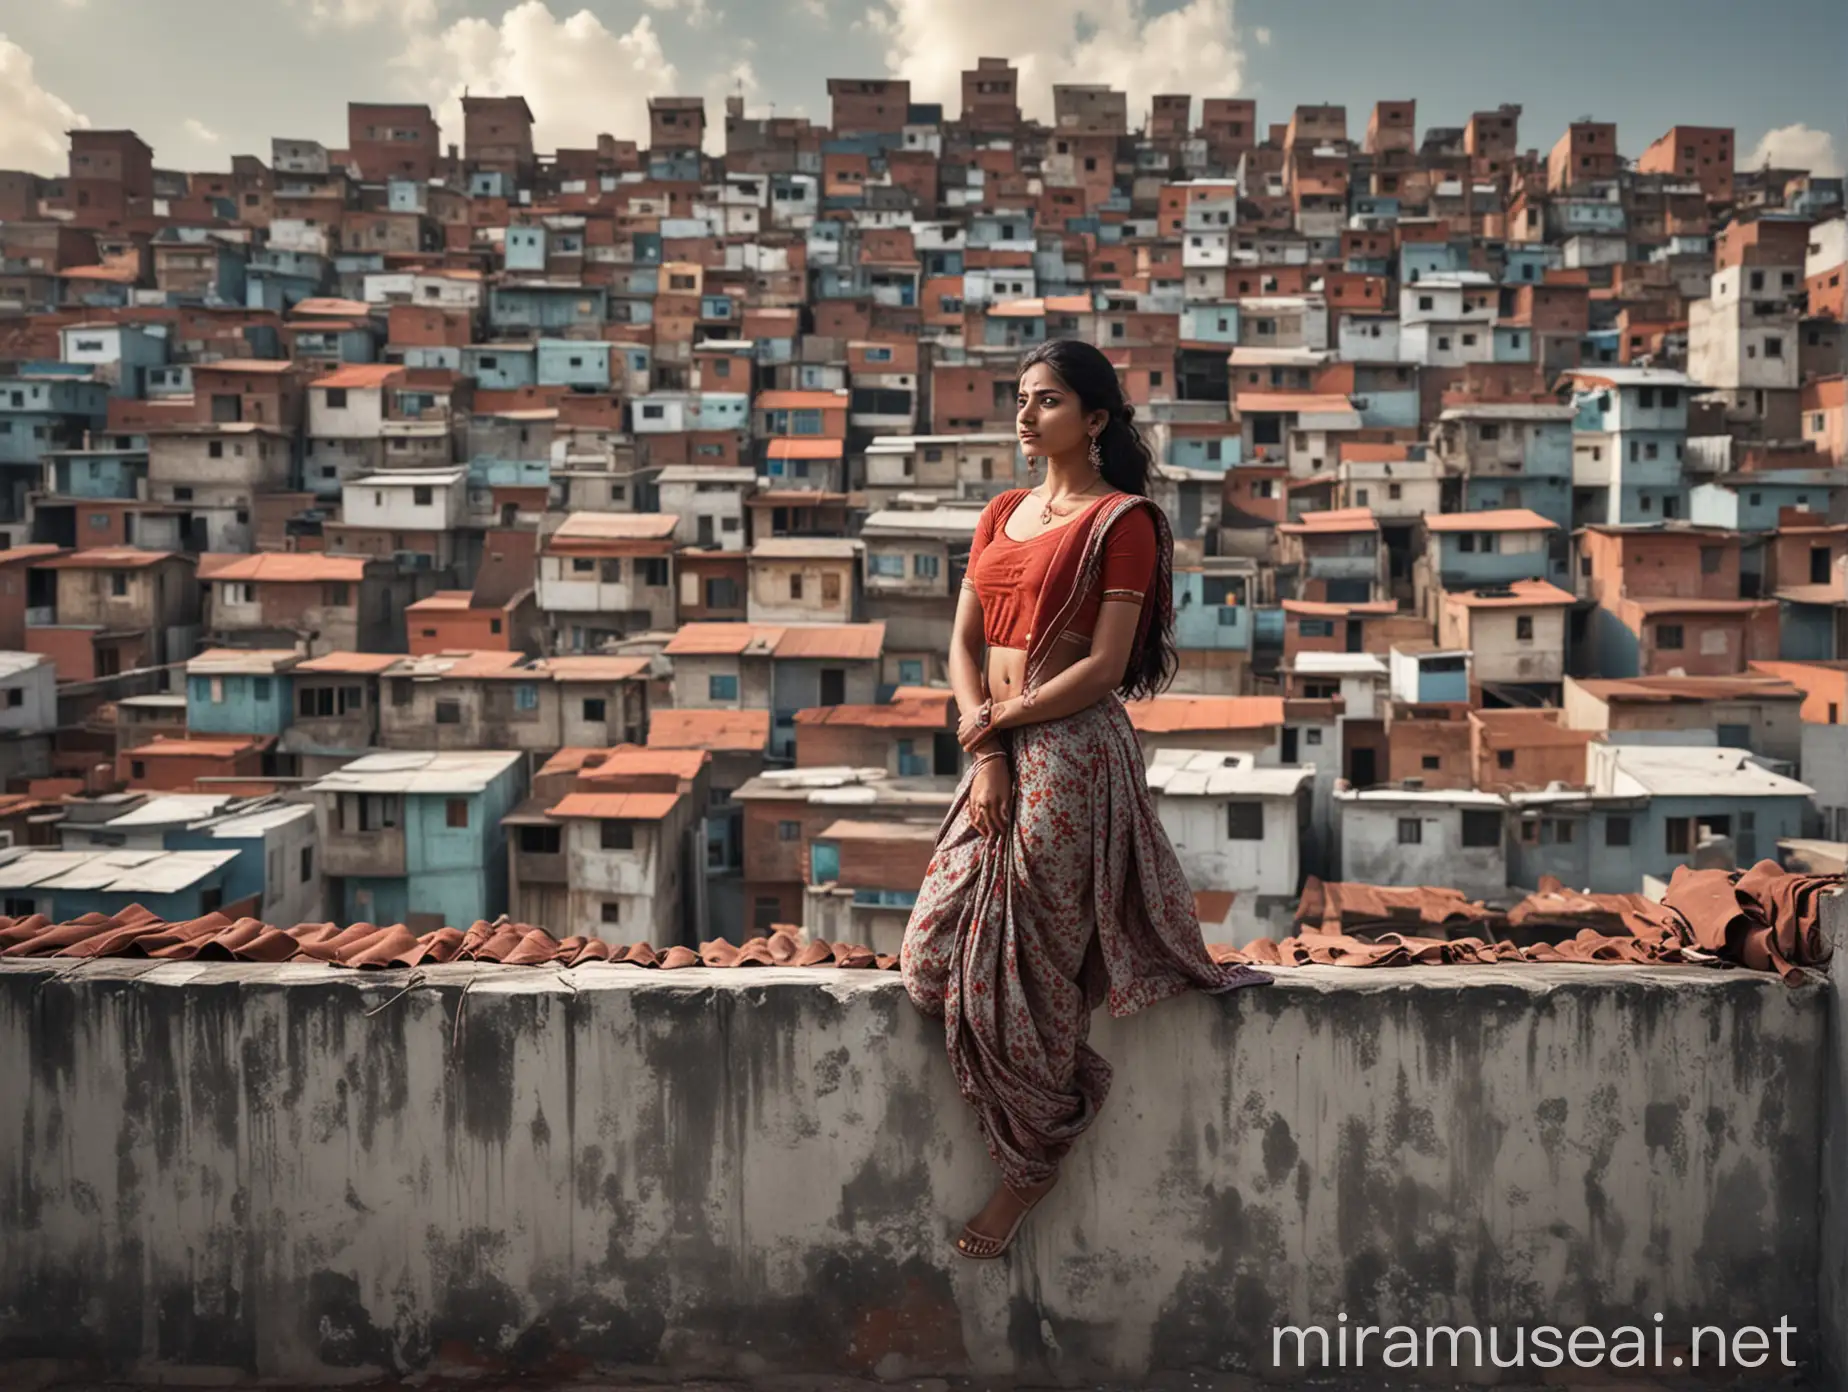 A indian beautiful women standing on roof of her house near a wall and behind many buildings visible, hyper realistic